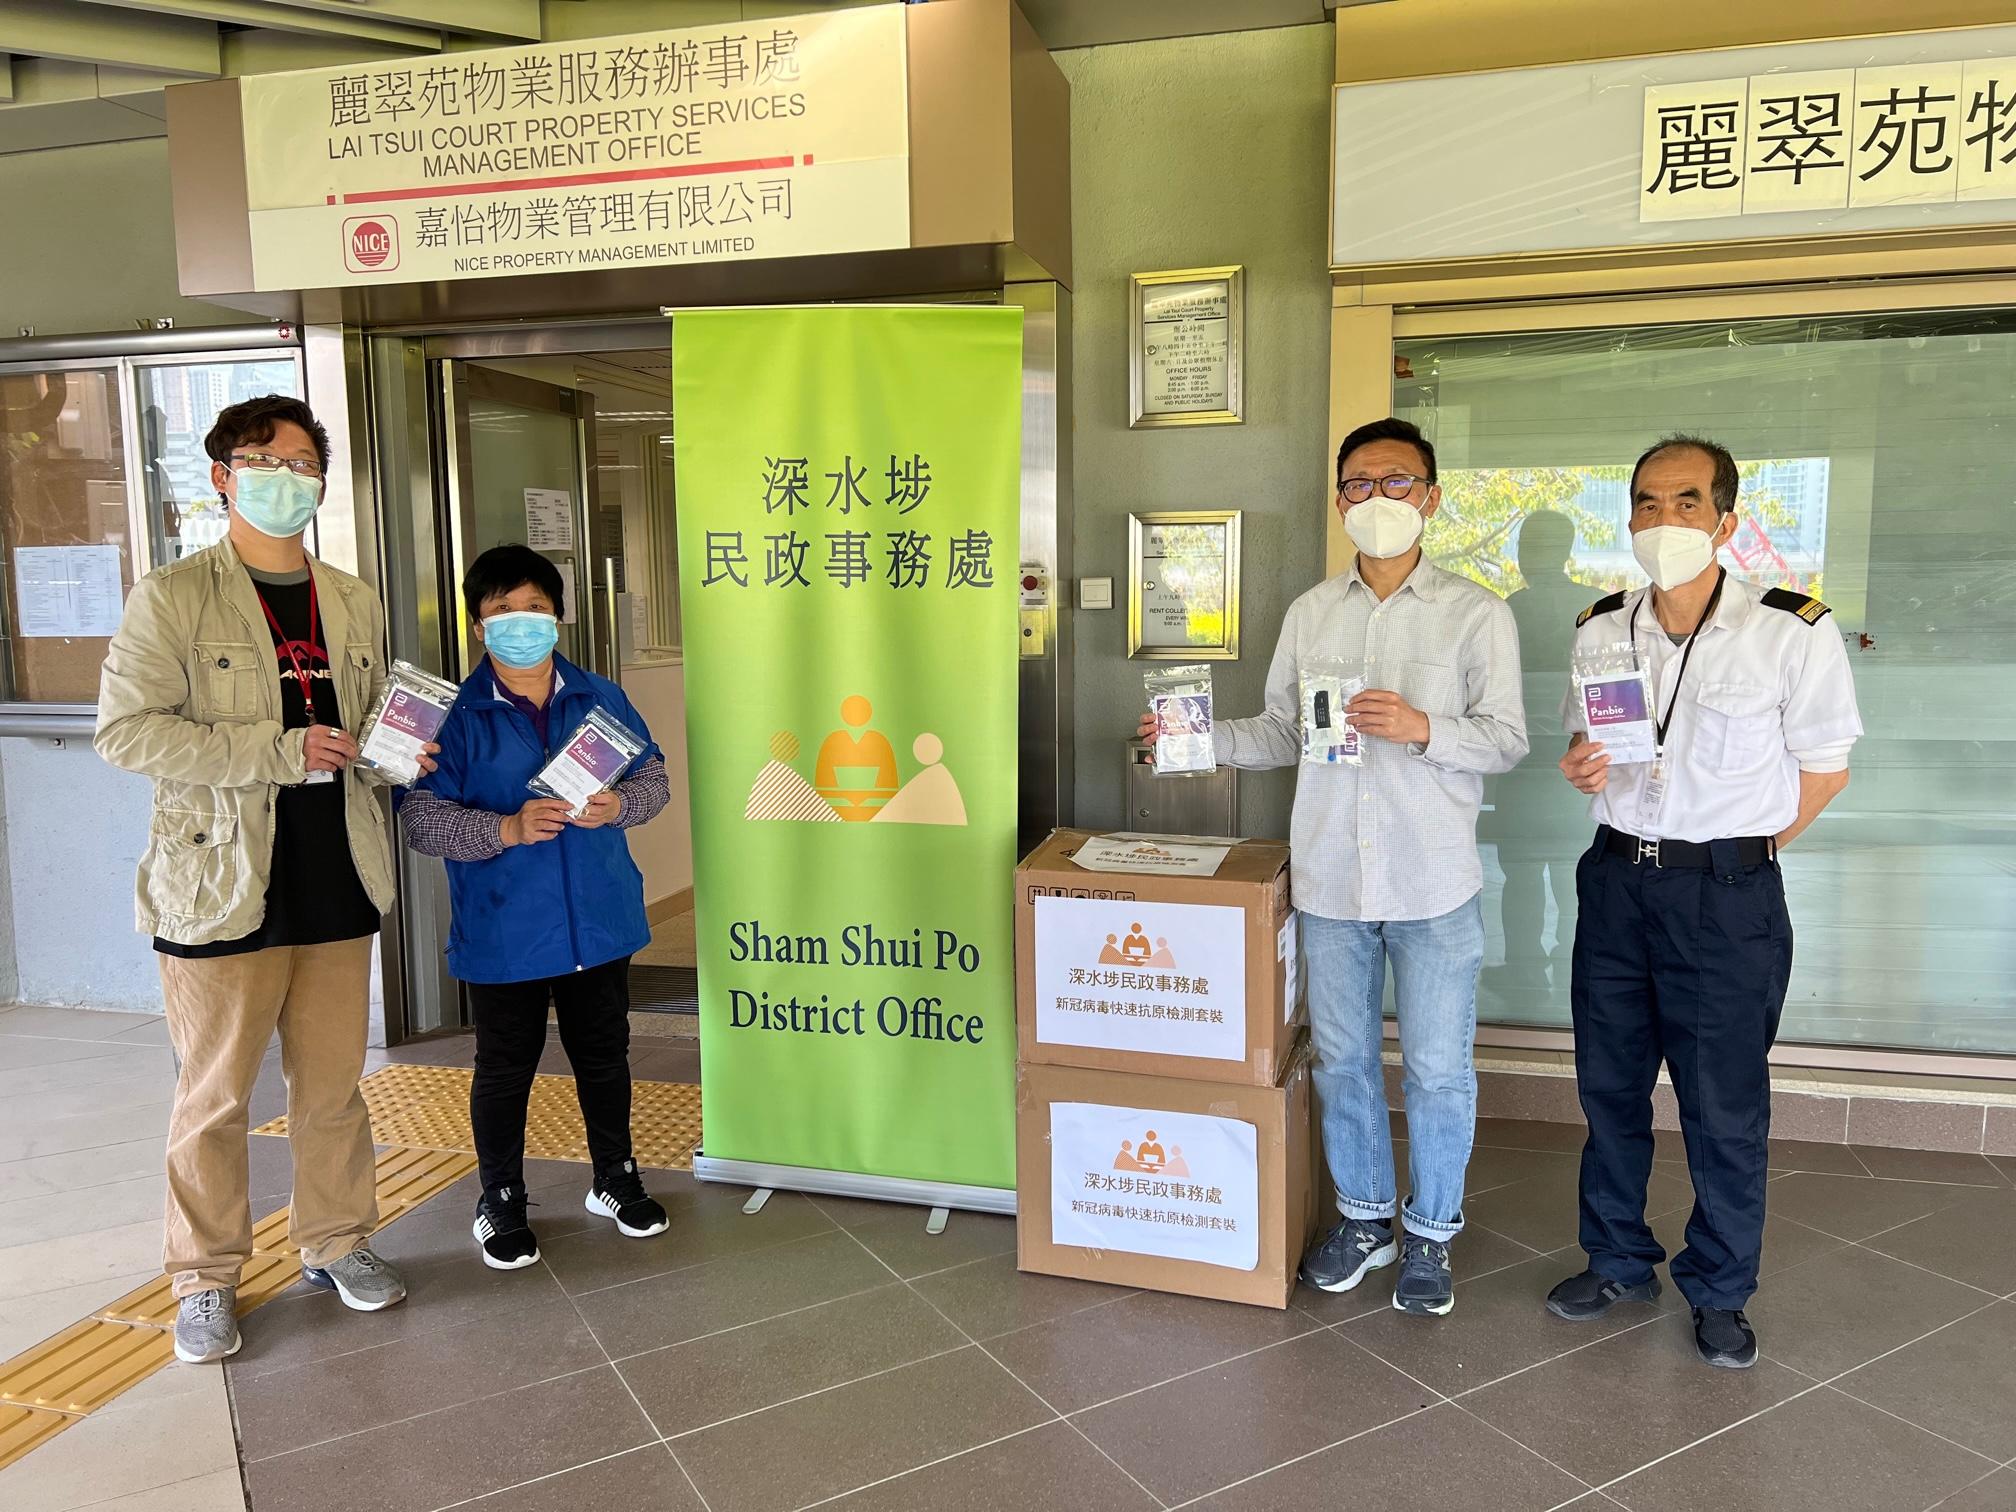 The Sham Shui Po District Office today (February 26) distributed COVID-19 rapid test kits to households, cleansing workers and property management staff living and working in Lai Pak House of Lai Tsui Court, Cheung Sha Wan for voluntary testing through the property management company.